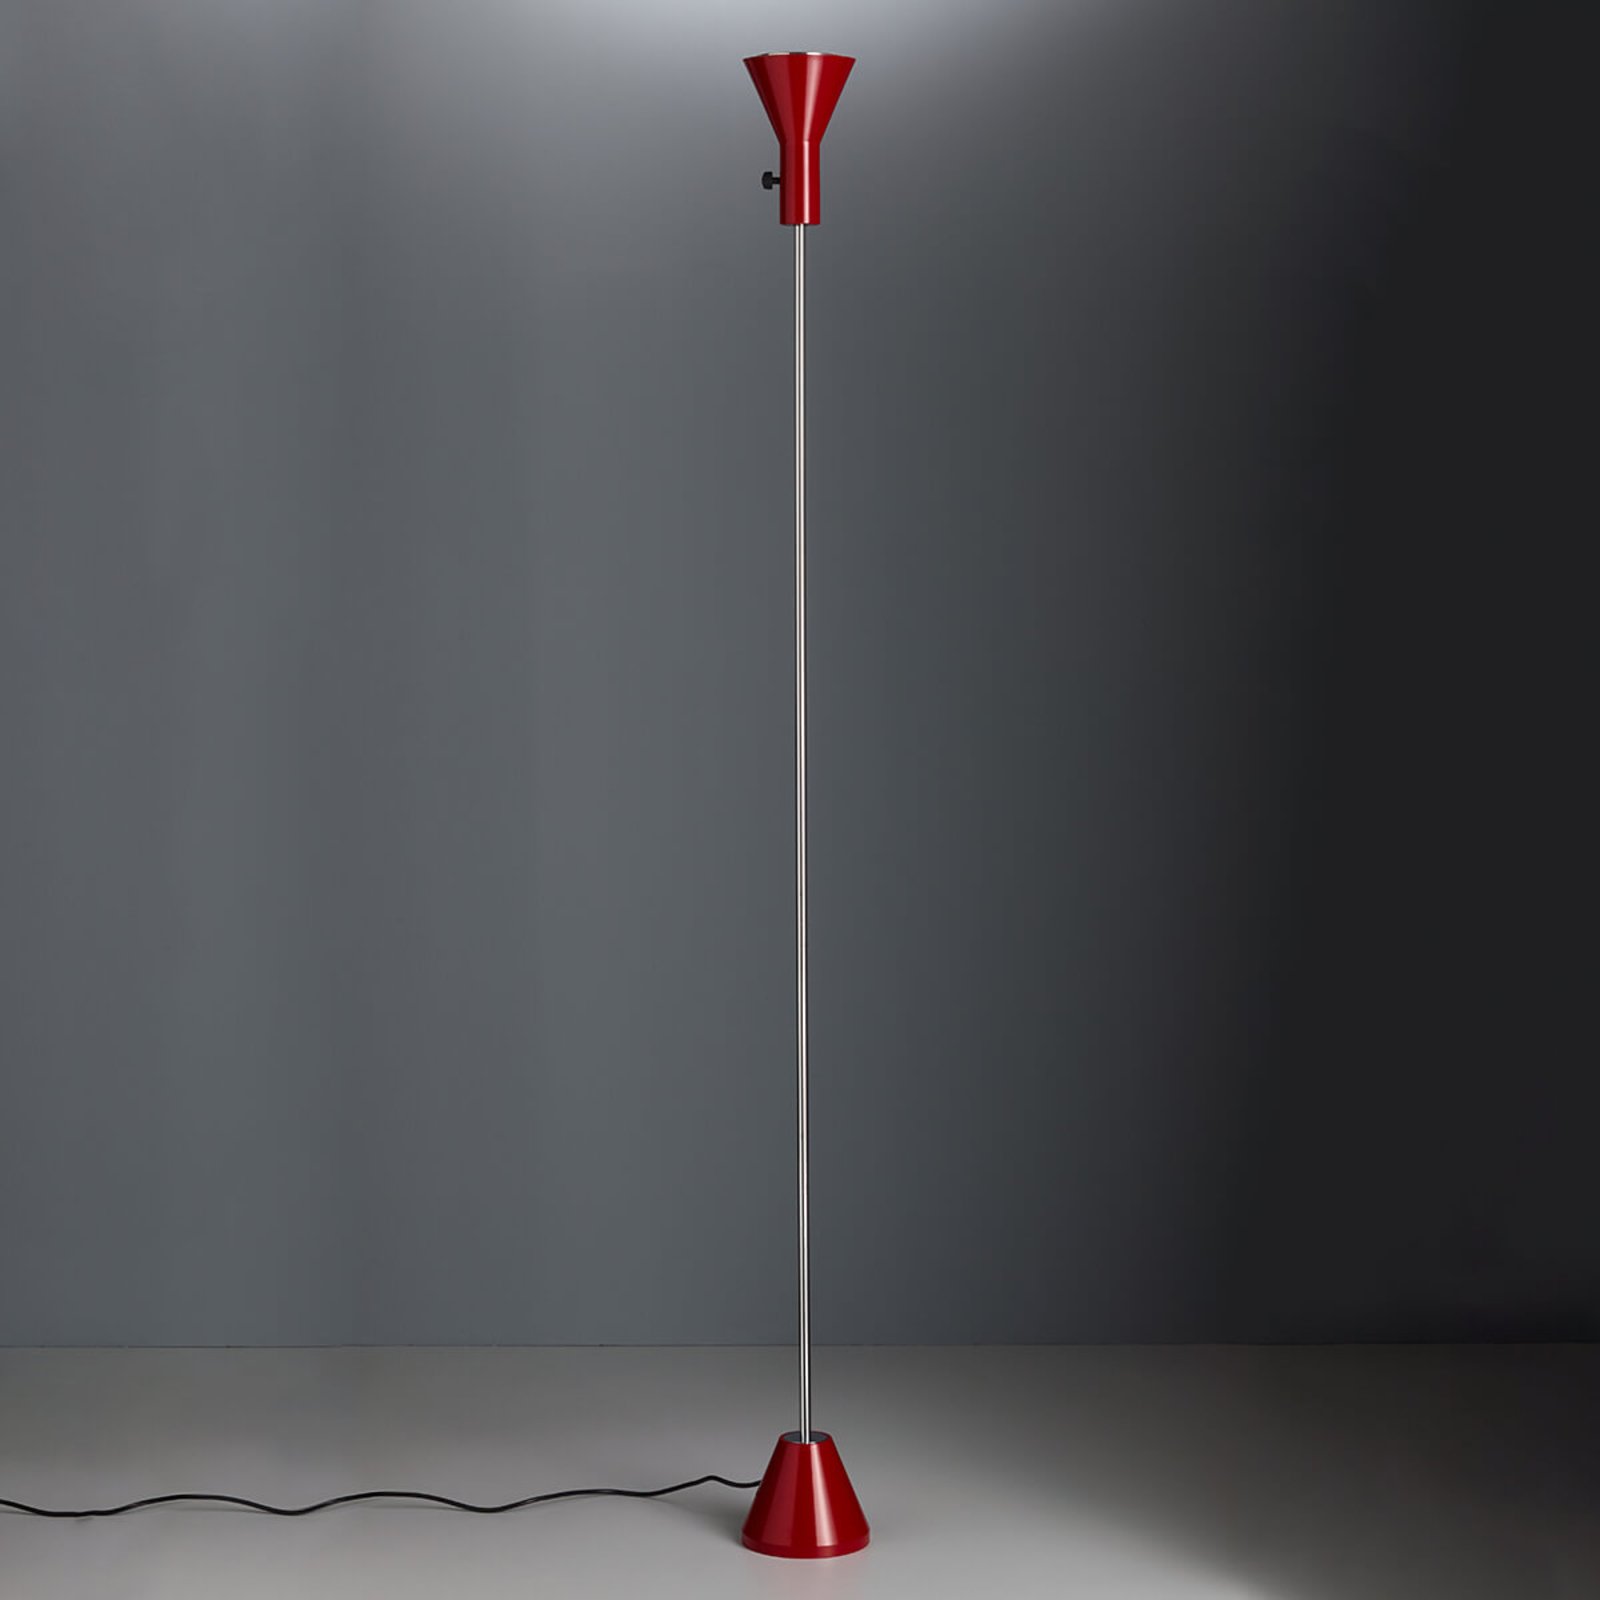 Dimmable LED floor lamp Gru in red